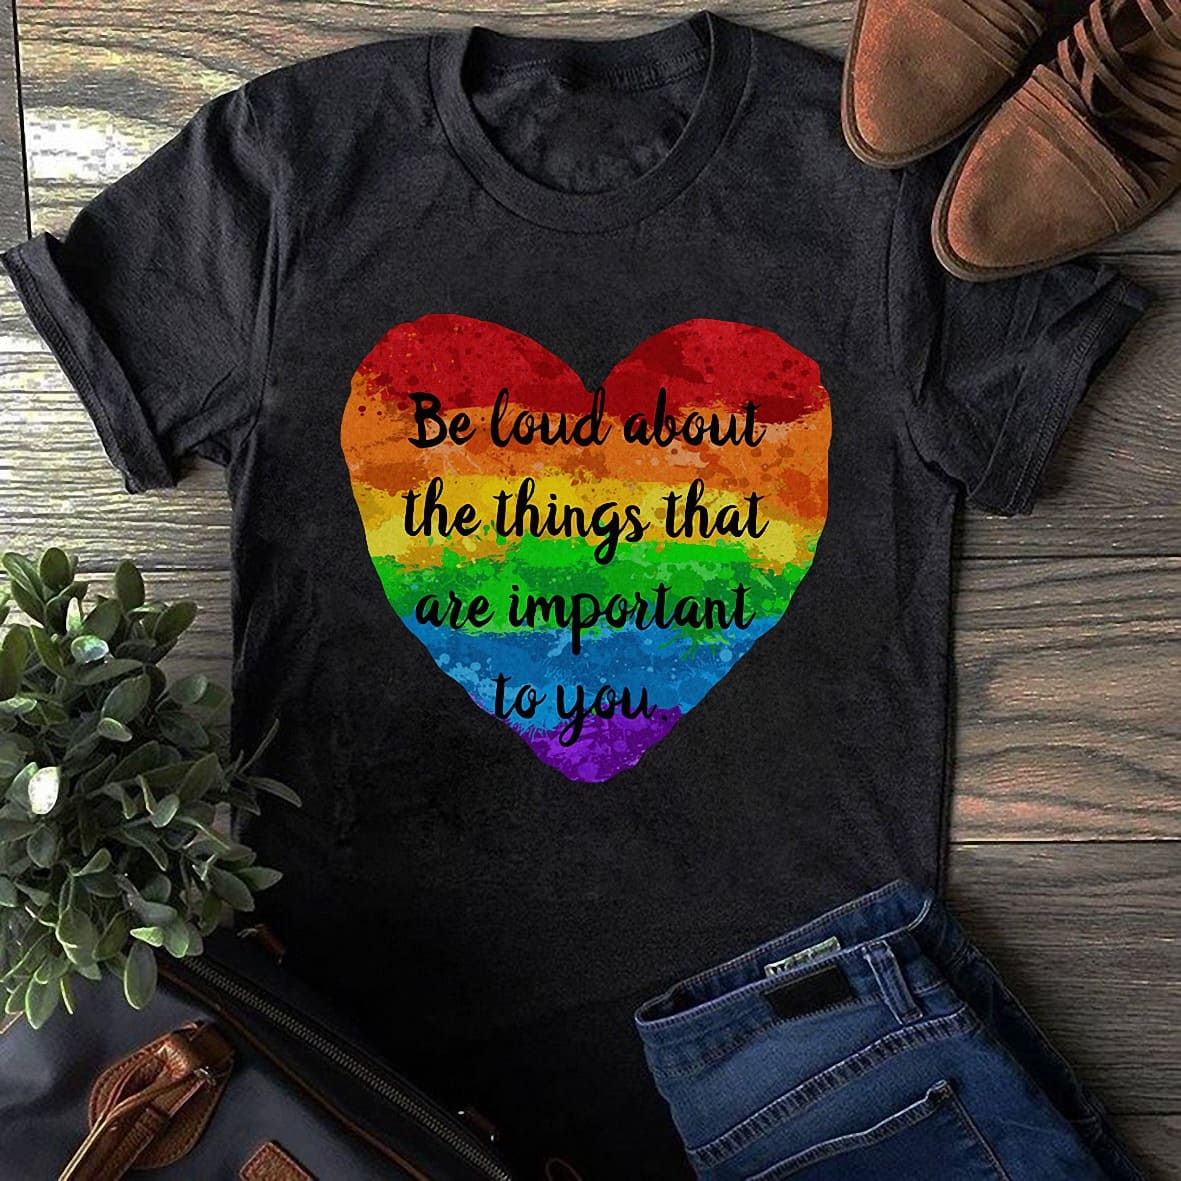 Be loud about the things that are important to you - Lgbt community, be yourself